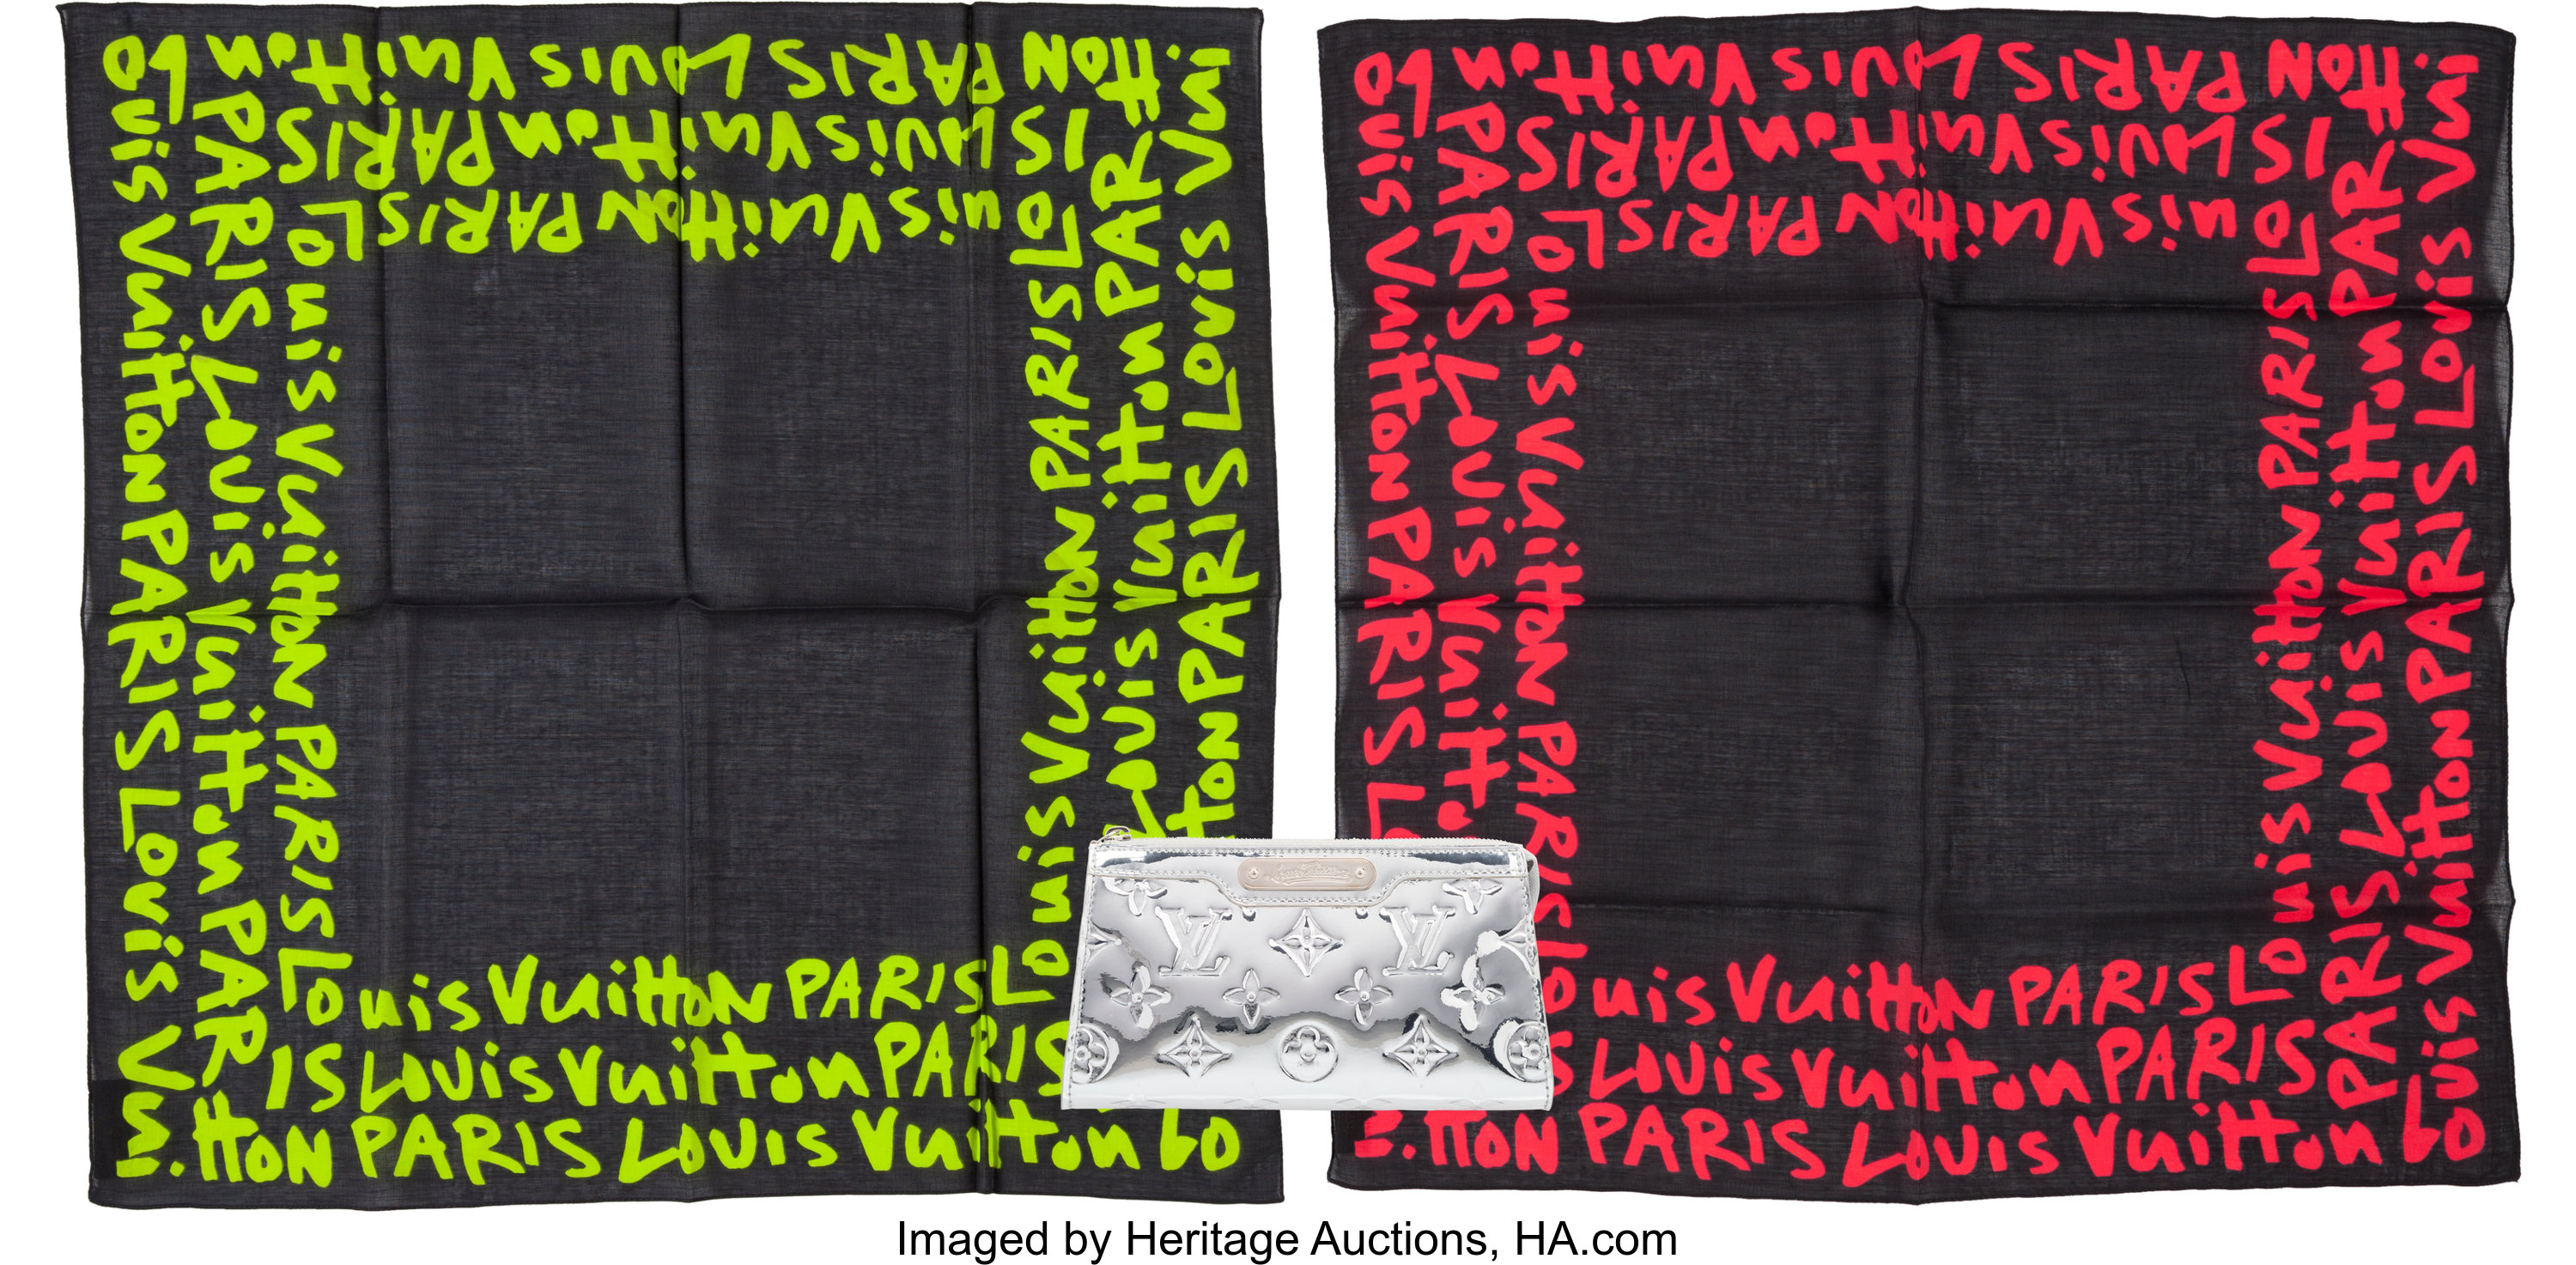 ❌SOLD❌ LOUIS VUITTON Sprouse Graffiti Scarf